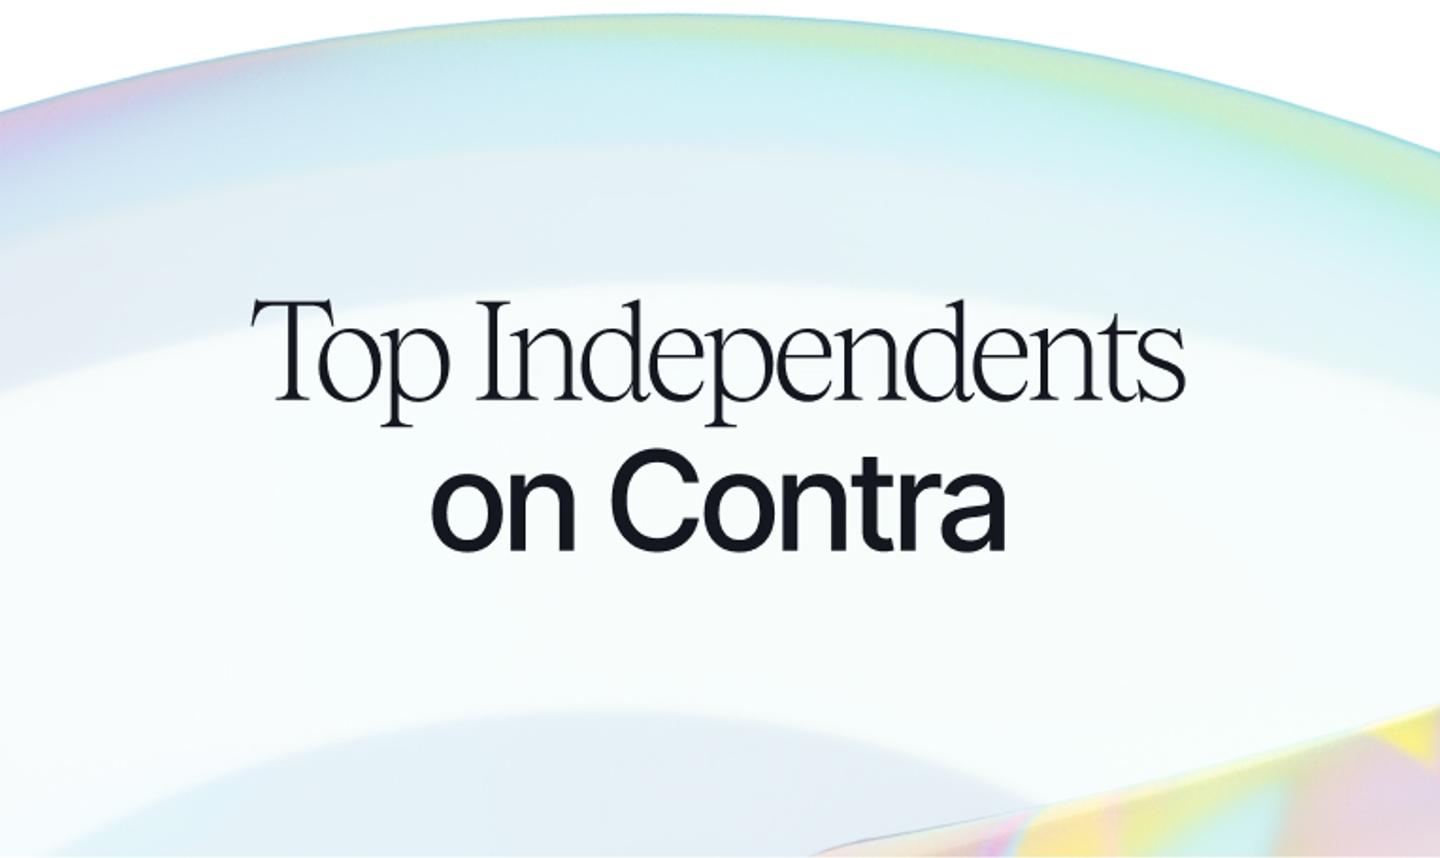 Top Independents on Contra